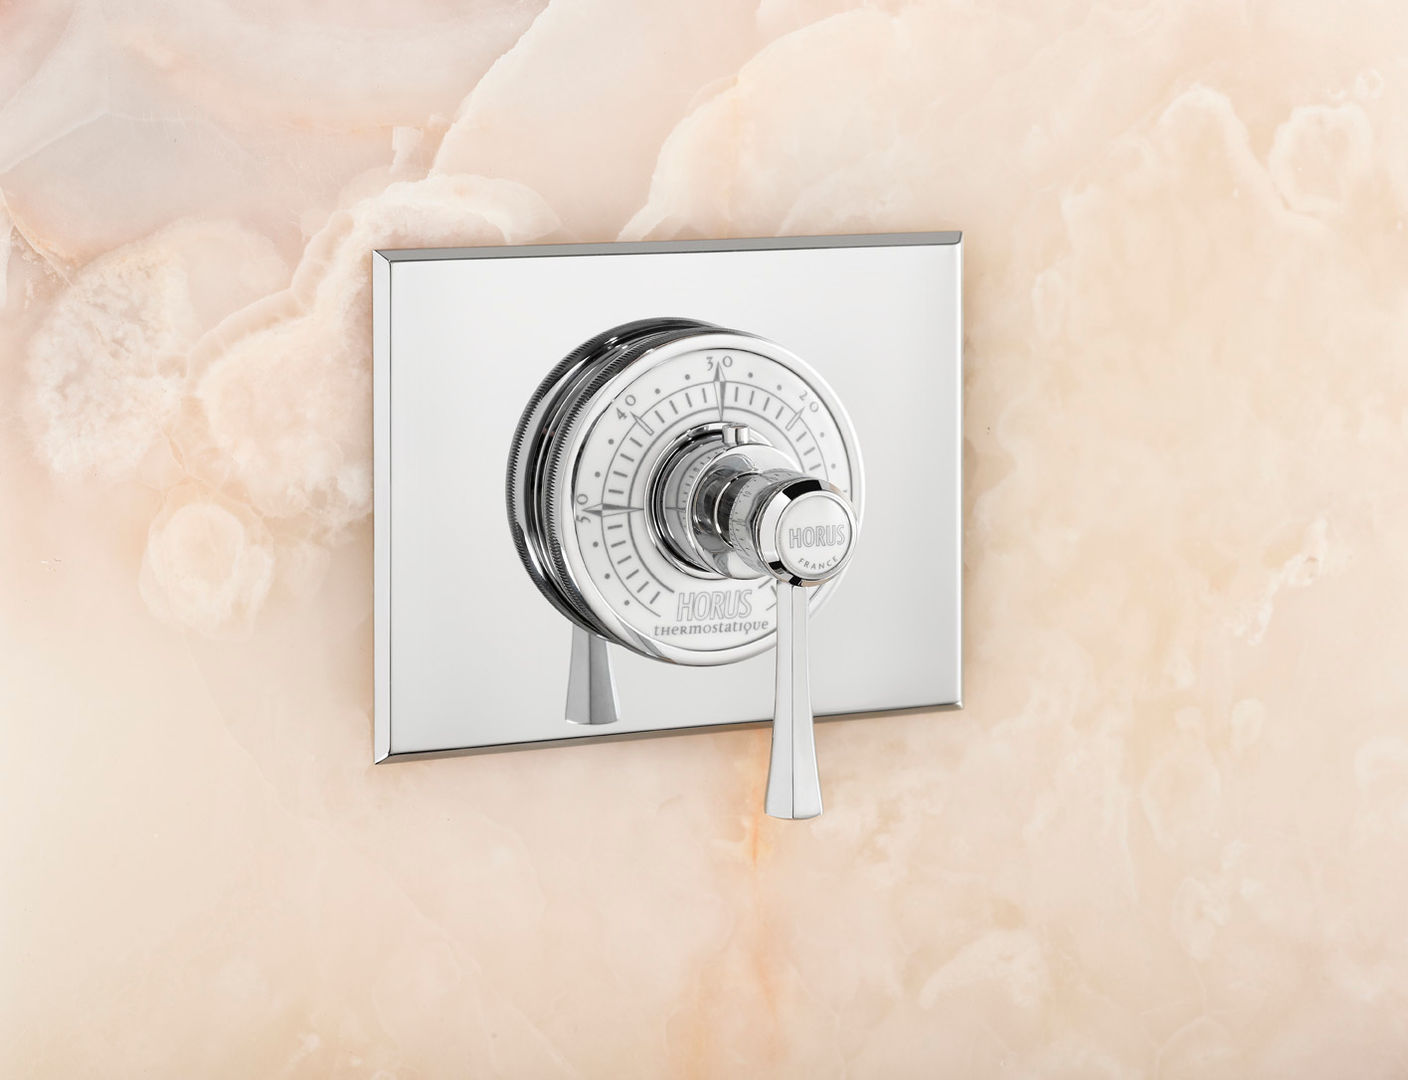 Thermostatic mixing HORUS Commercial spaces Hotels